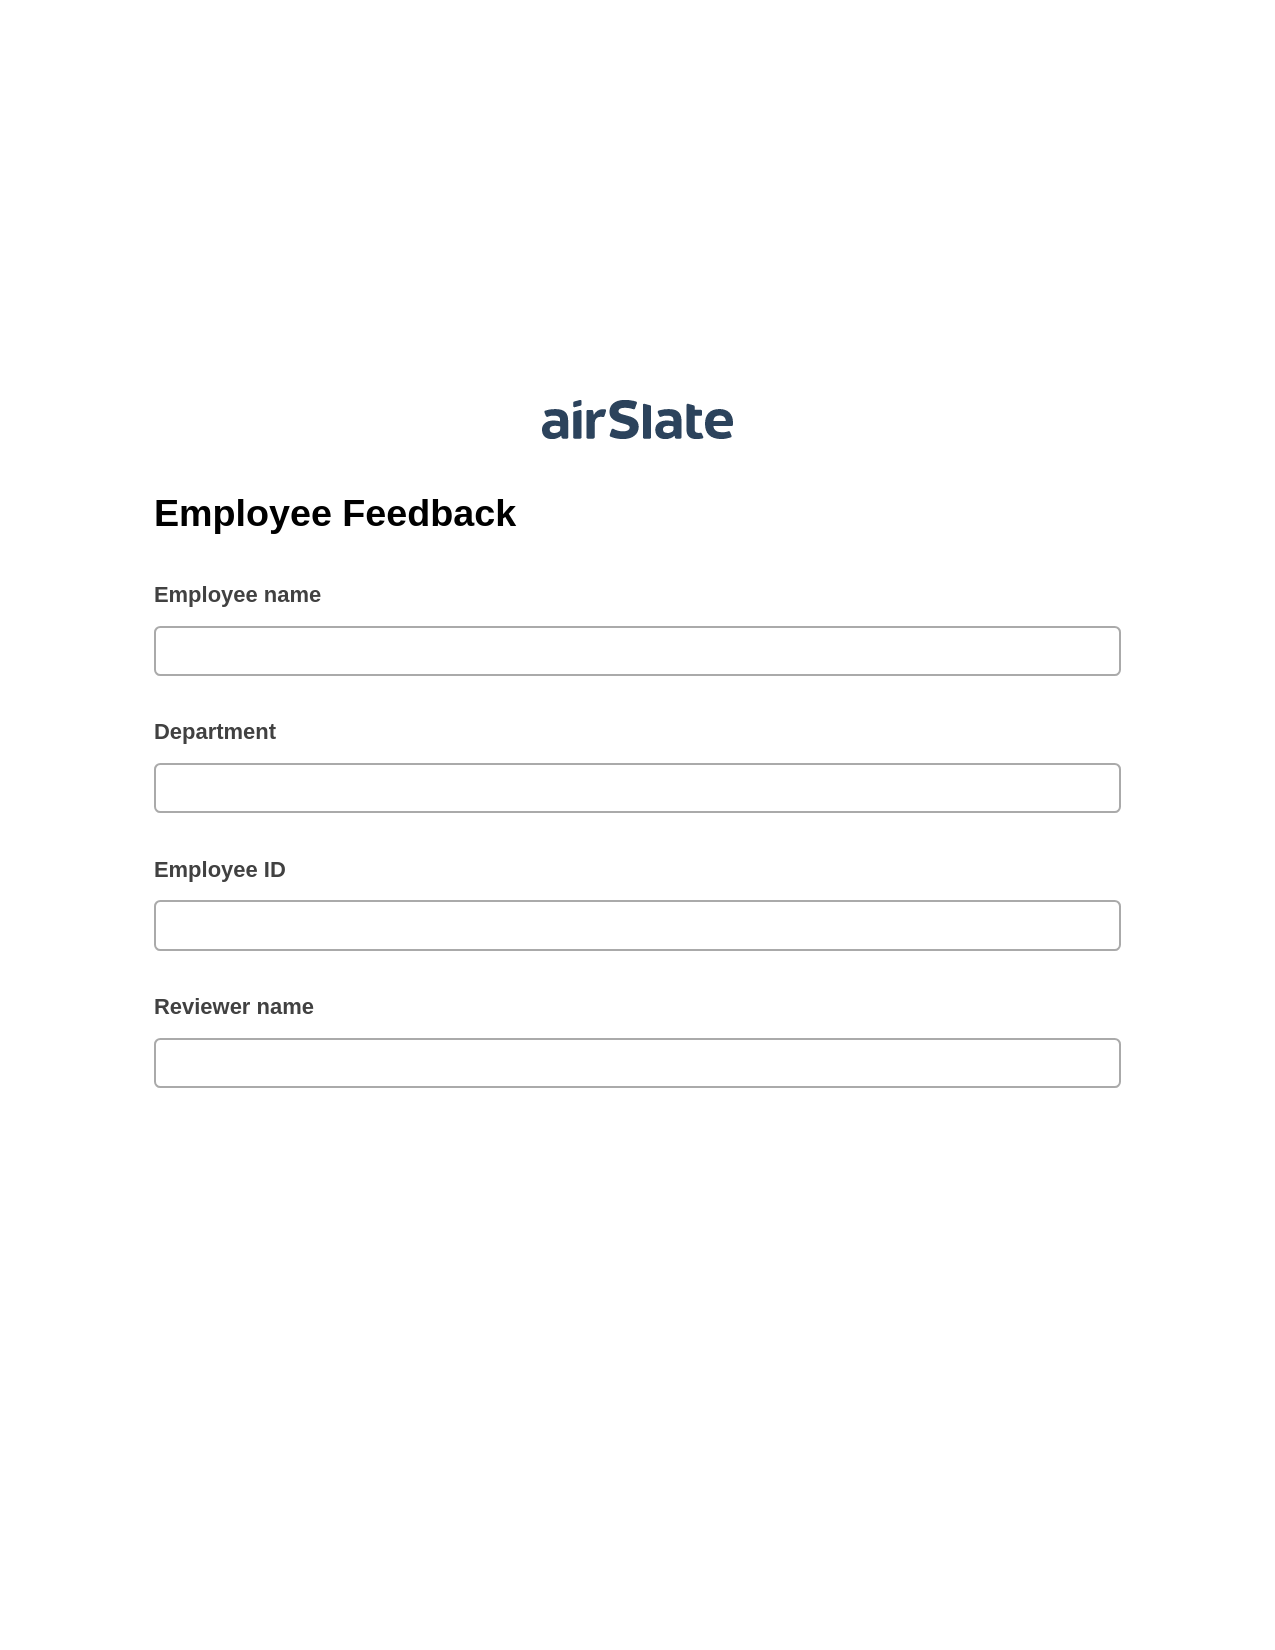 Employee Feedback Pre-fill Slate from MS Dynamics 365 Records Bot, Assign Roles to Recipients Bot, Post-finish Document Bot